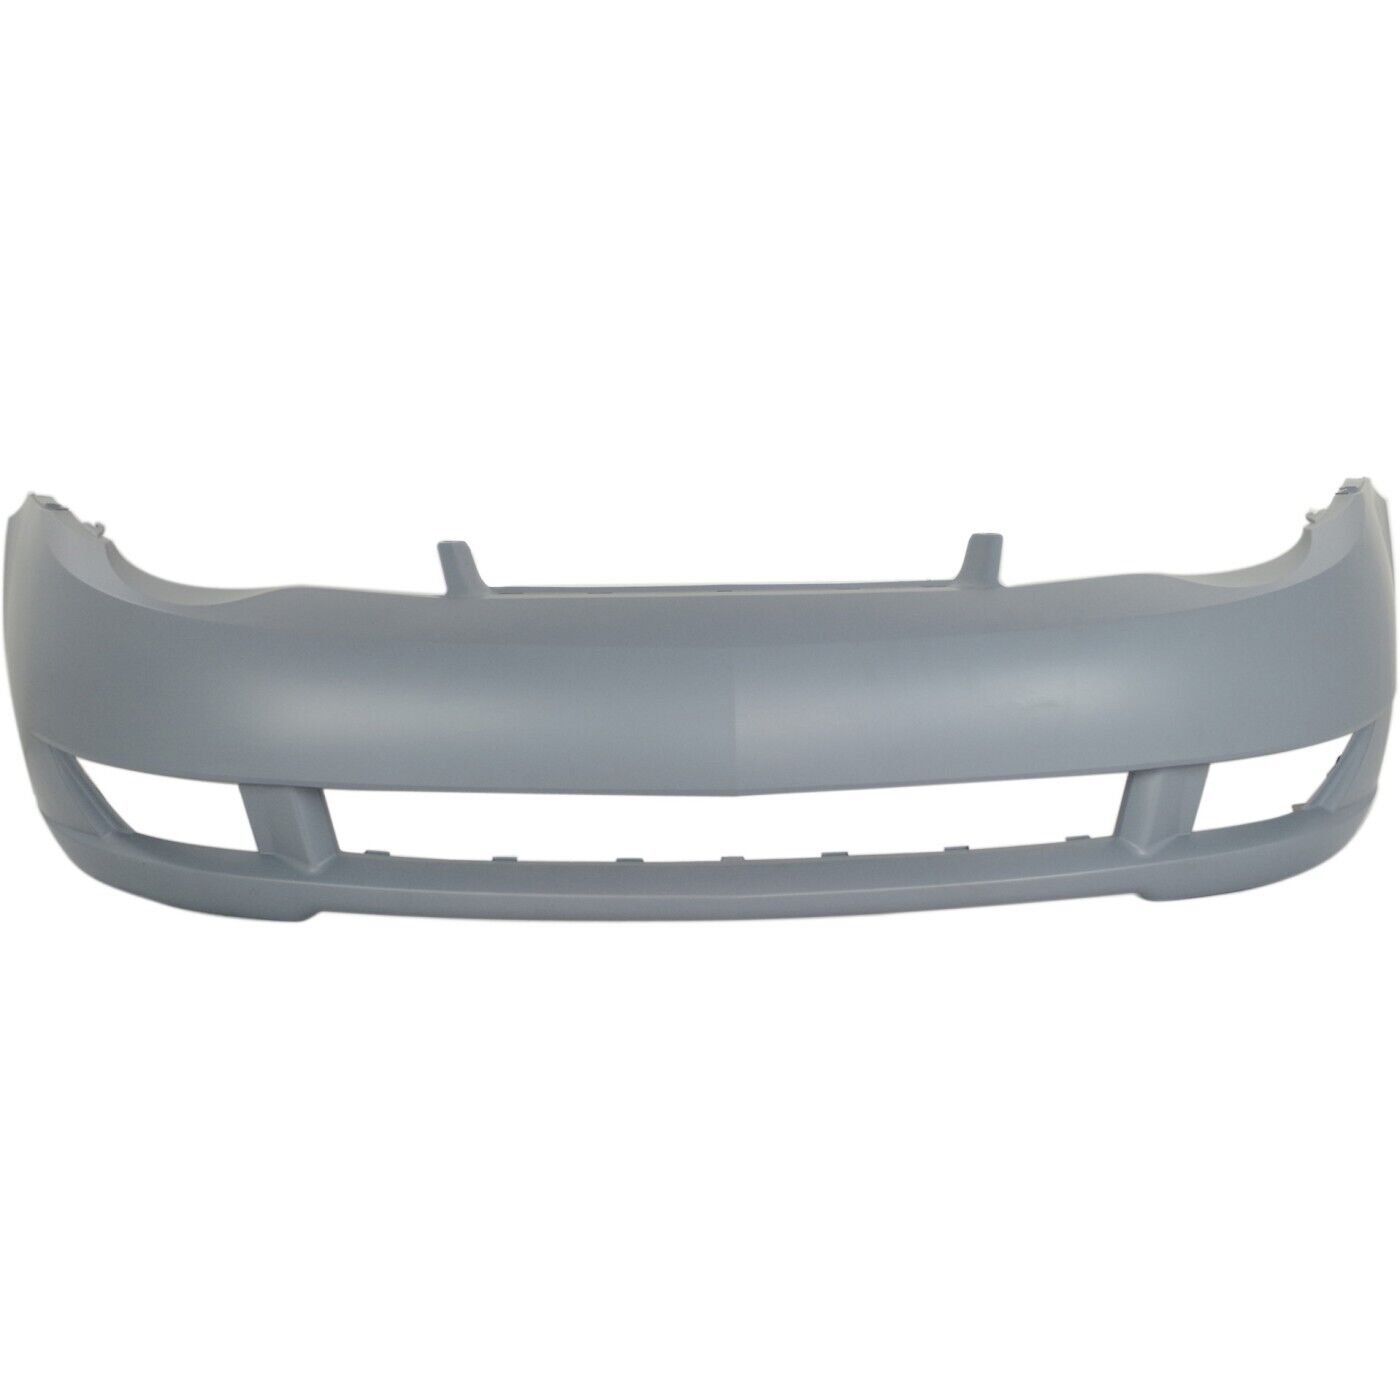 Front Bumper Cover For 2003-2007 Saturn Ion Coupe w/ fog lamp holes Primed